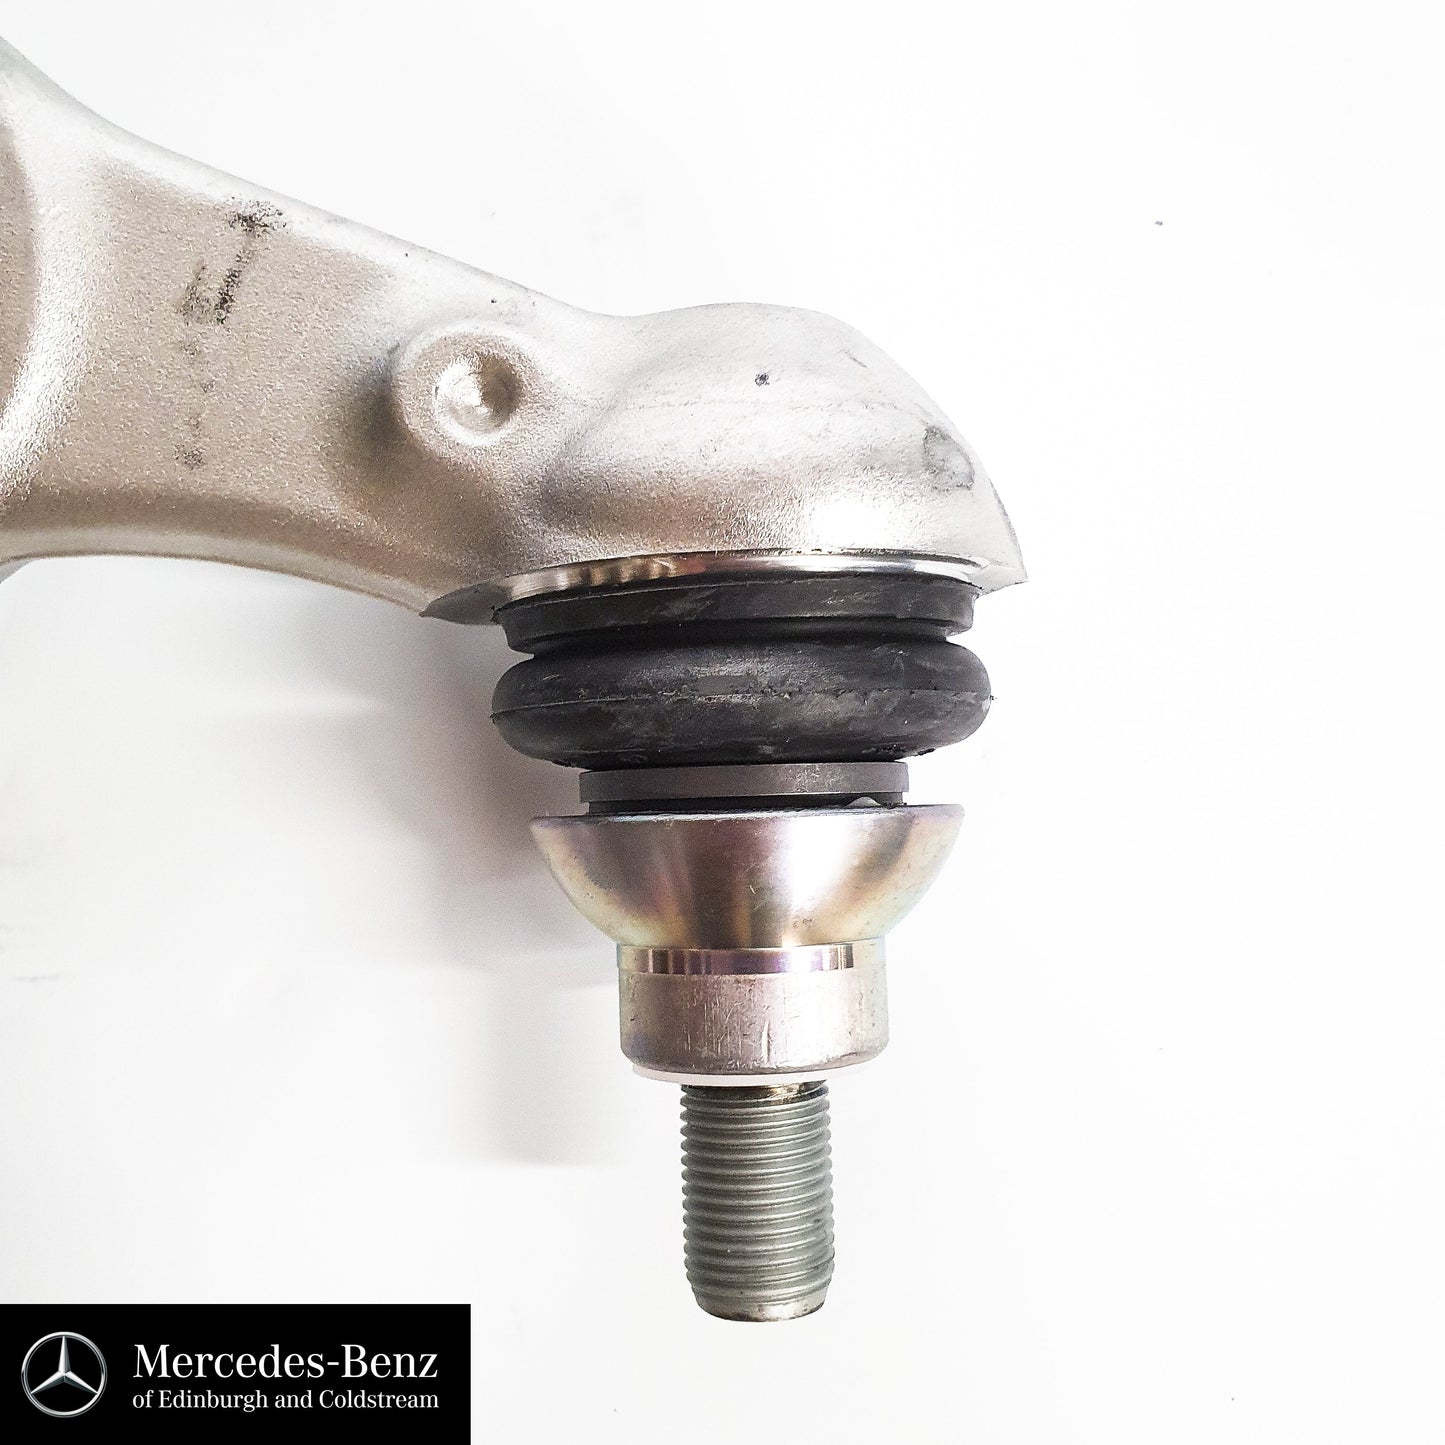 Genuine Mercedes-Benz C Class, E Class, CLS models Front Control Arm - Spring Link - Hybrid cars